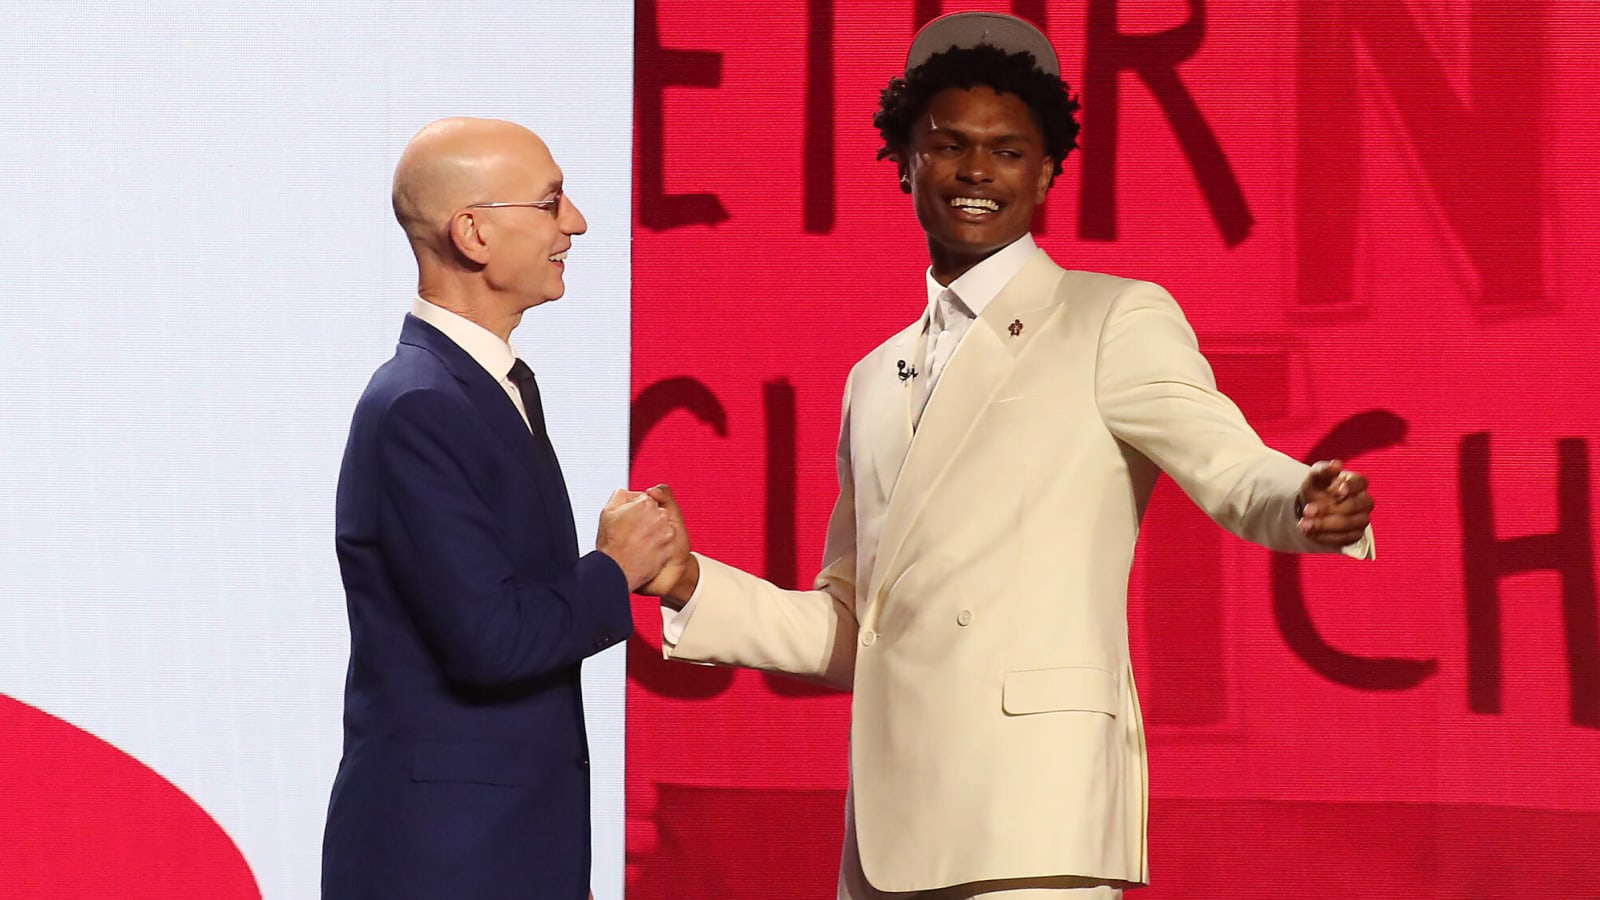 Best, worst fits from the NBA Draft's first round